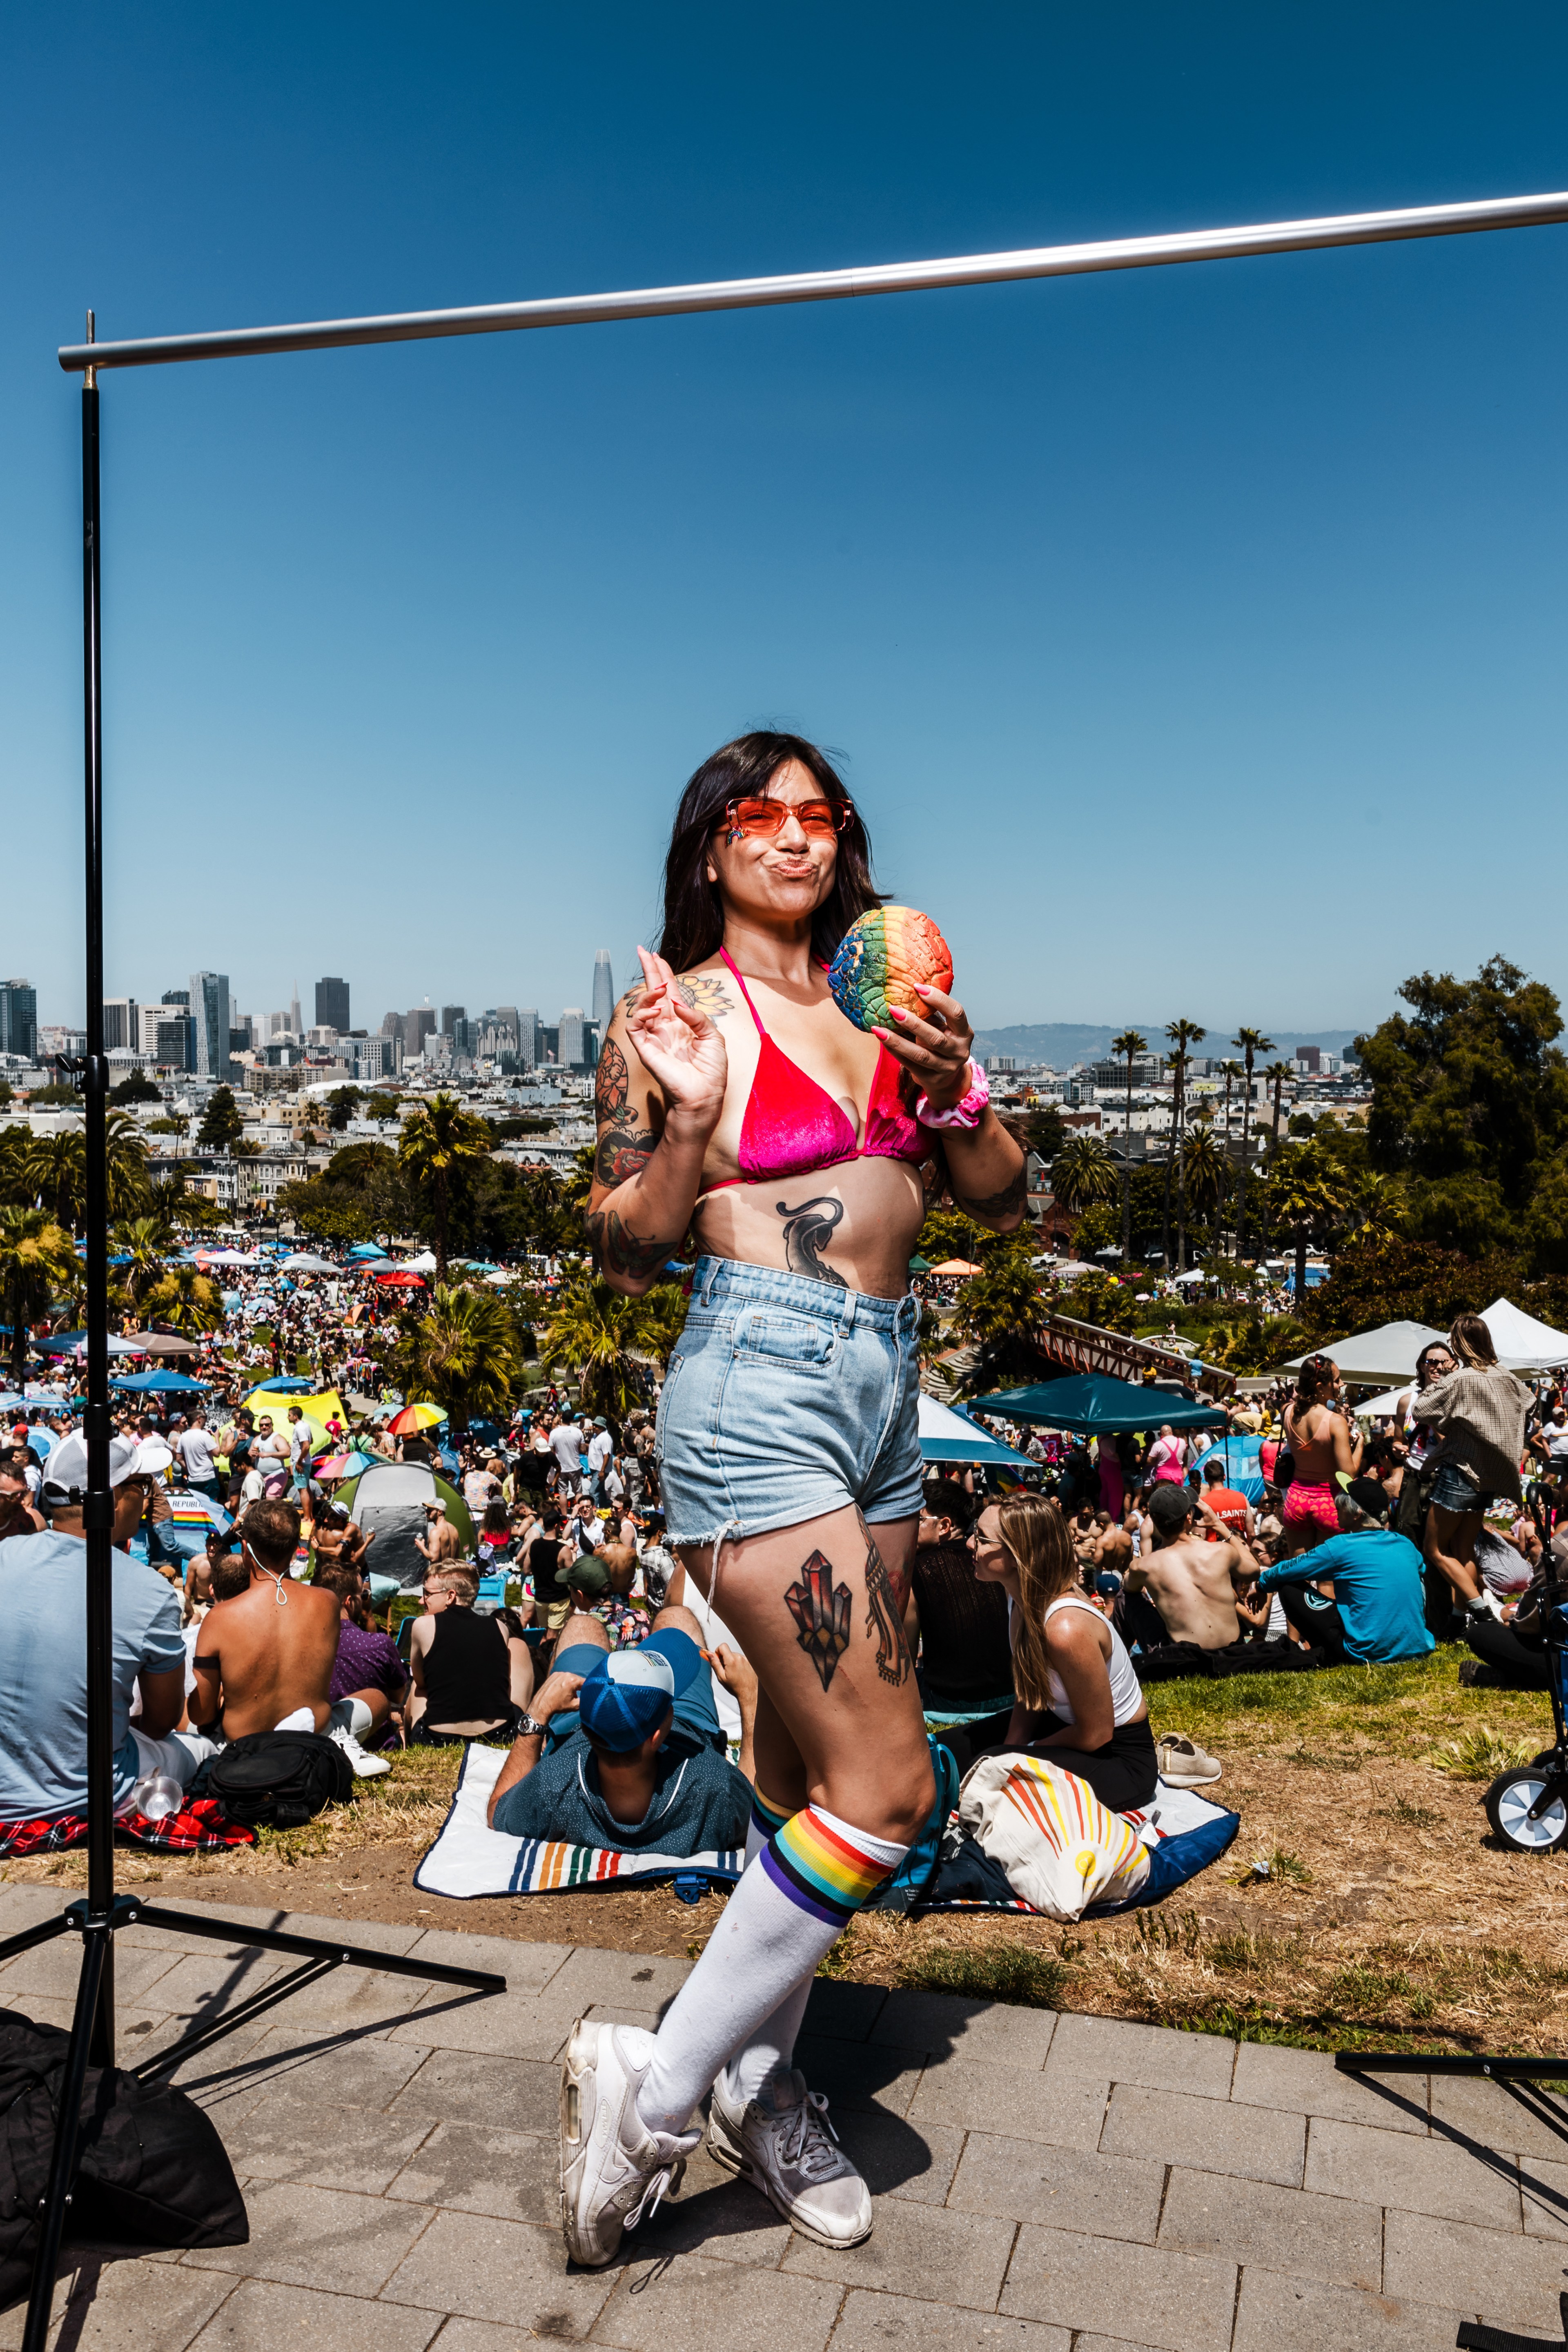 A woman in a pink bikini top, denim shorts, and rainbow socks poses with a peace sign and a colorful object, surrounded by a festive crowd in a sunny outdoor setting.